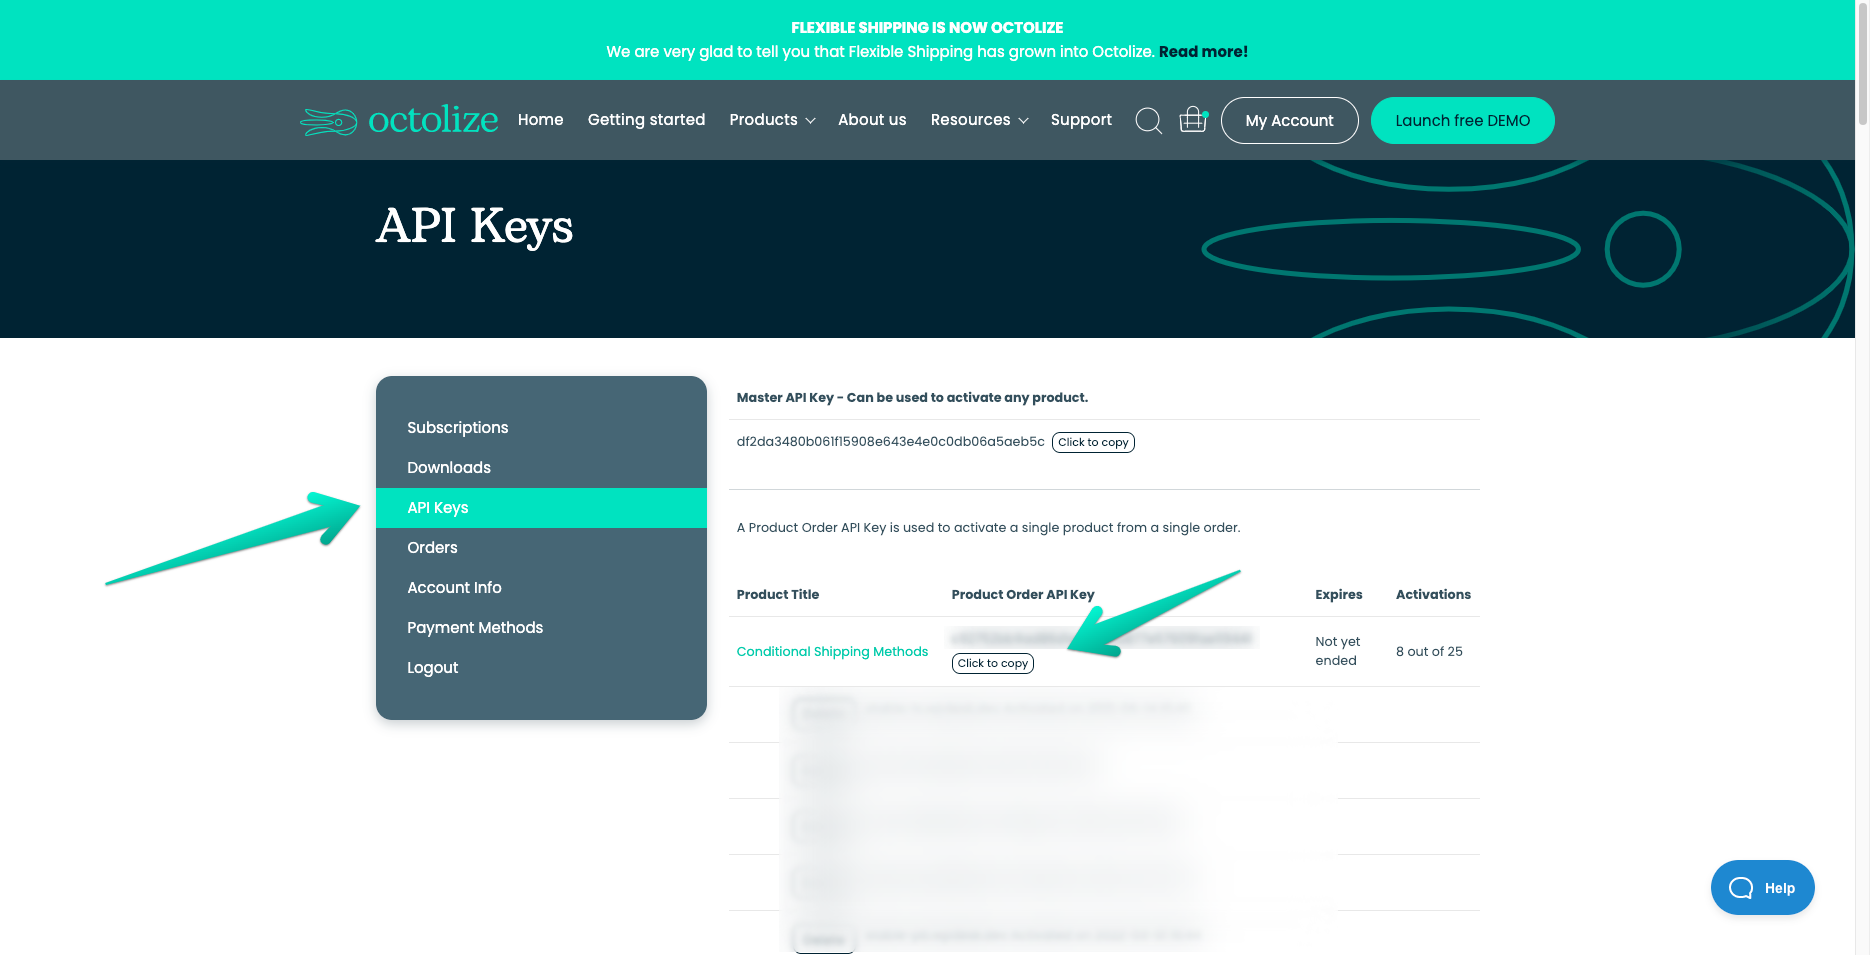 On My Account you will find the API Key needed for license activation